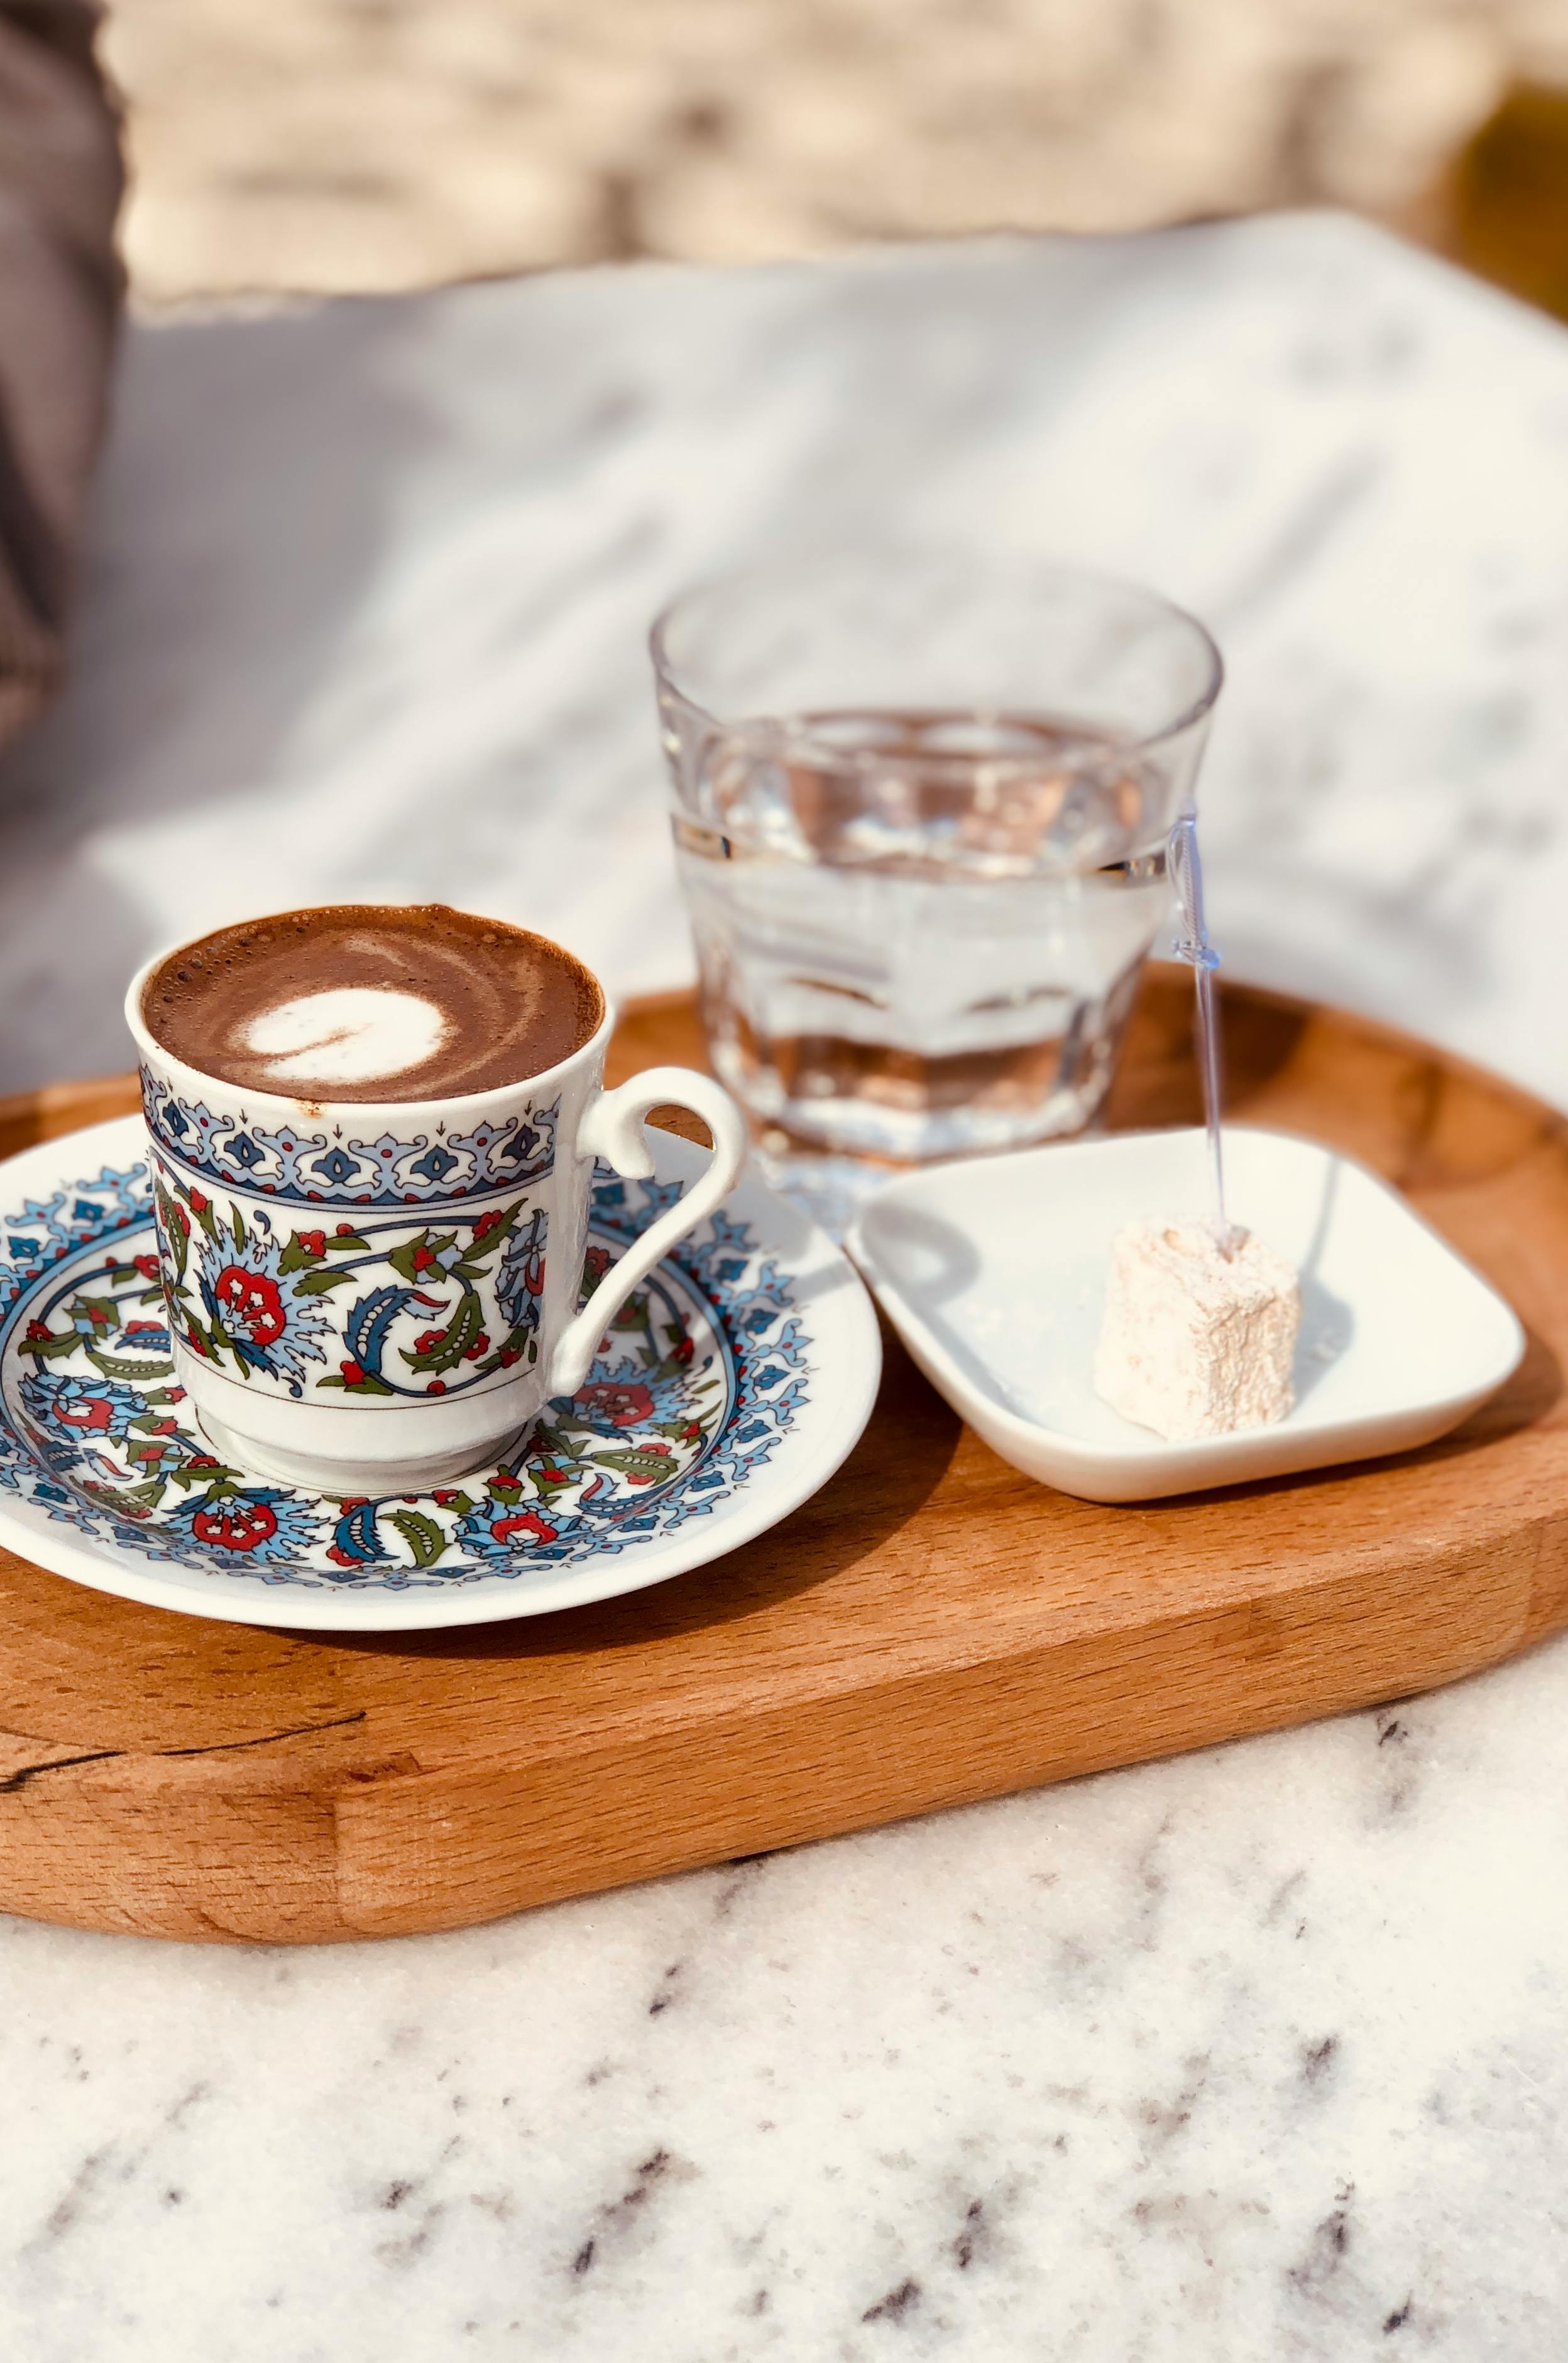 Turka for Coffee and Coffee Cups Stock Photo - Image of capacity